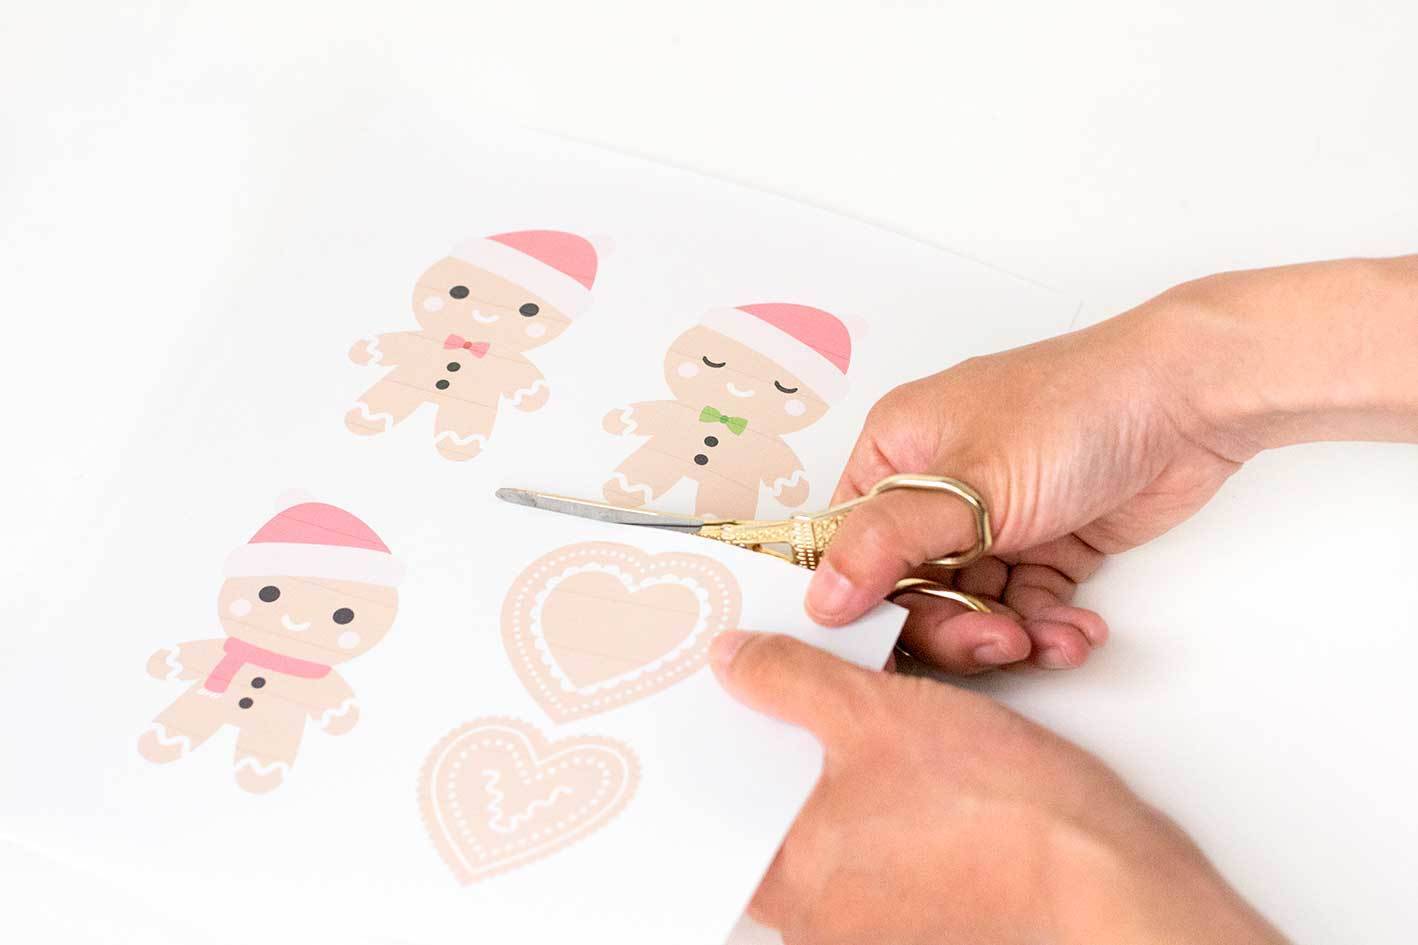 Shrink plastic gingerbread gift toppers - step 2